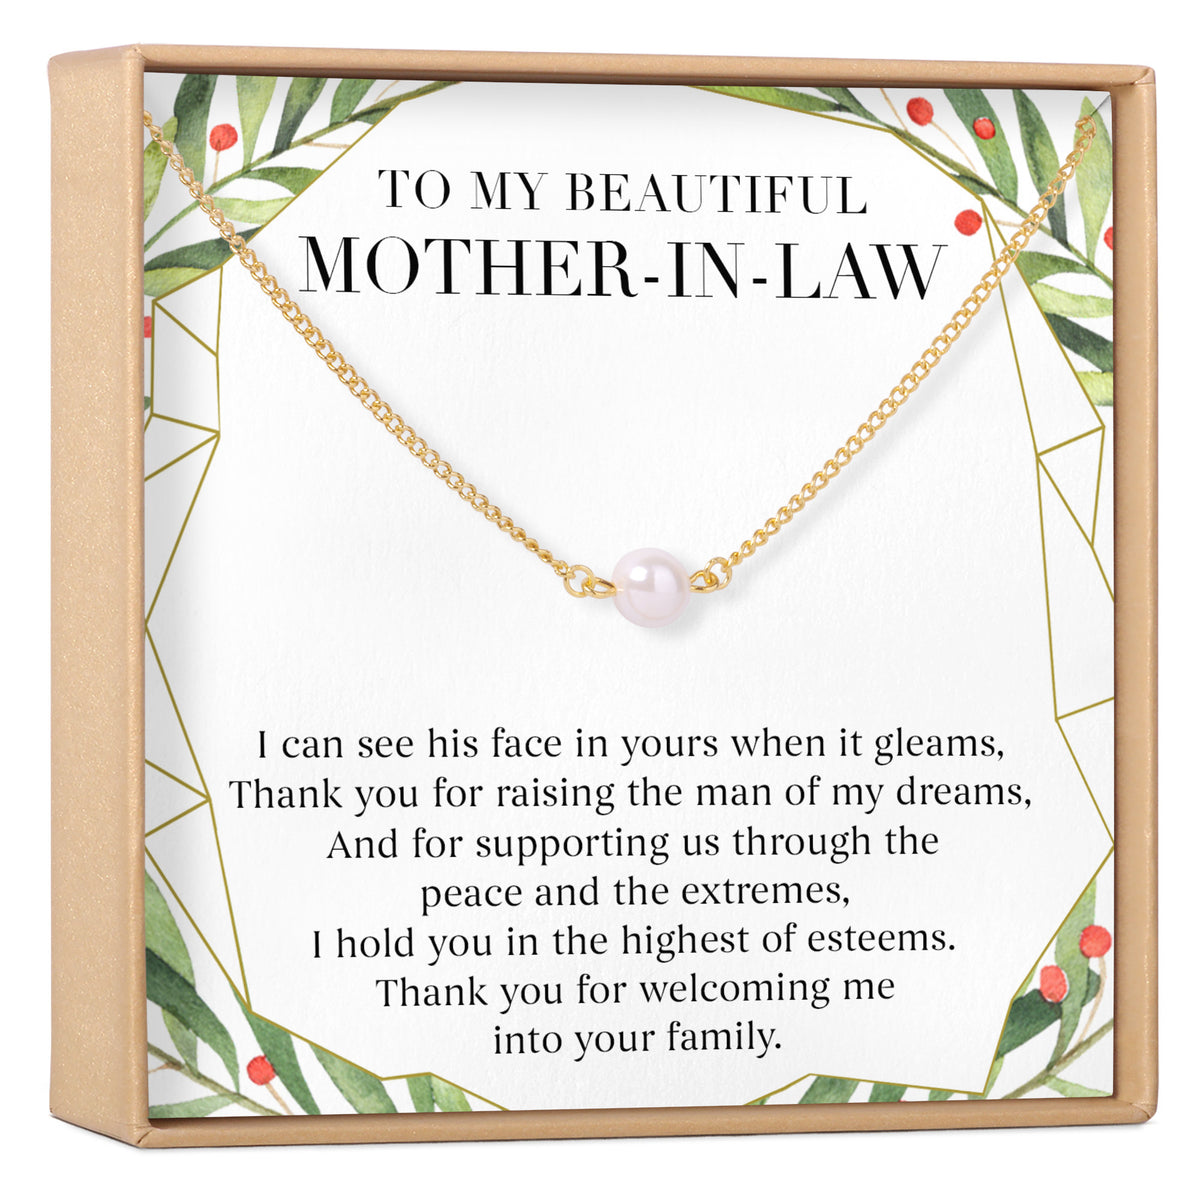 Christmas Gift for Mother in Law: Present, Necklace, Jewelry, Xmas Gift, Gift Idea for Mother in Law, Husband's Mom, Multiple Styles, Butterfly / Gold